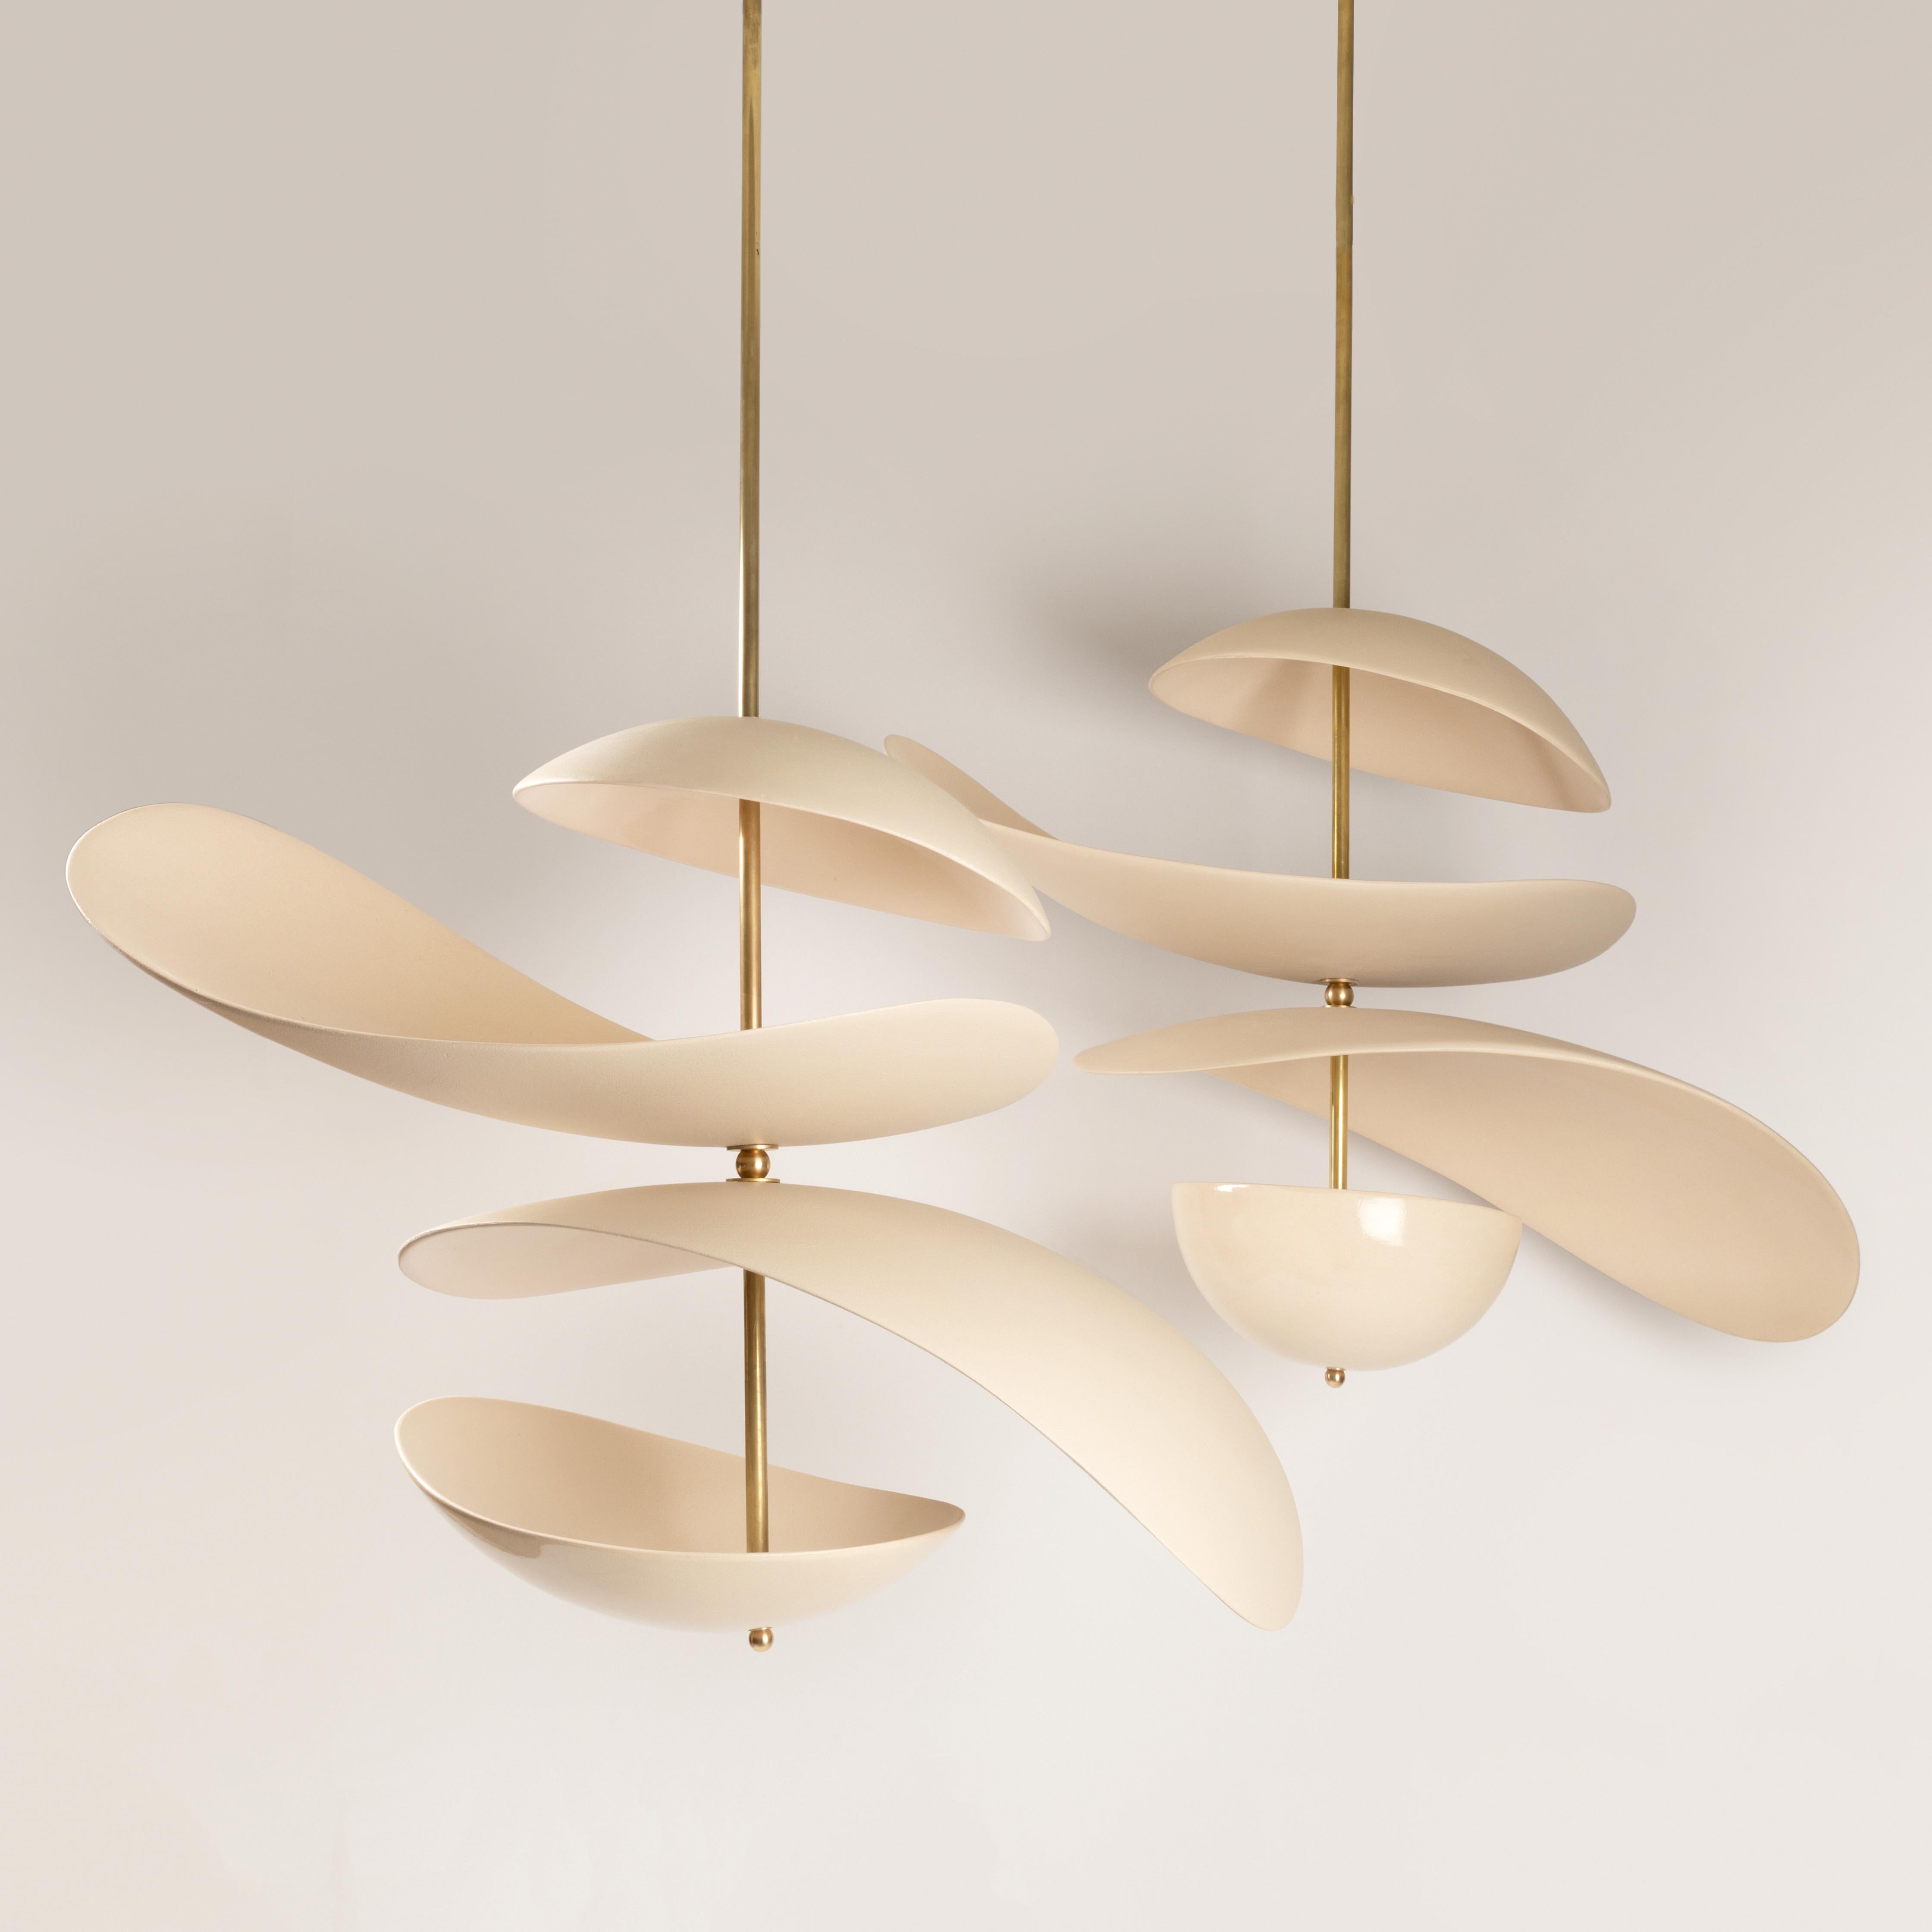 Set of 2 Selene Pendant Lamps by Elsa Foulon.
Dimensions: D 75 x H 50 cm.
Materials: ceramic, brass.
Unique piece.
Also available in different options: bowl or cup (lower part).

All our lamps can be wired according to each country. If sold to the